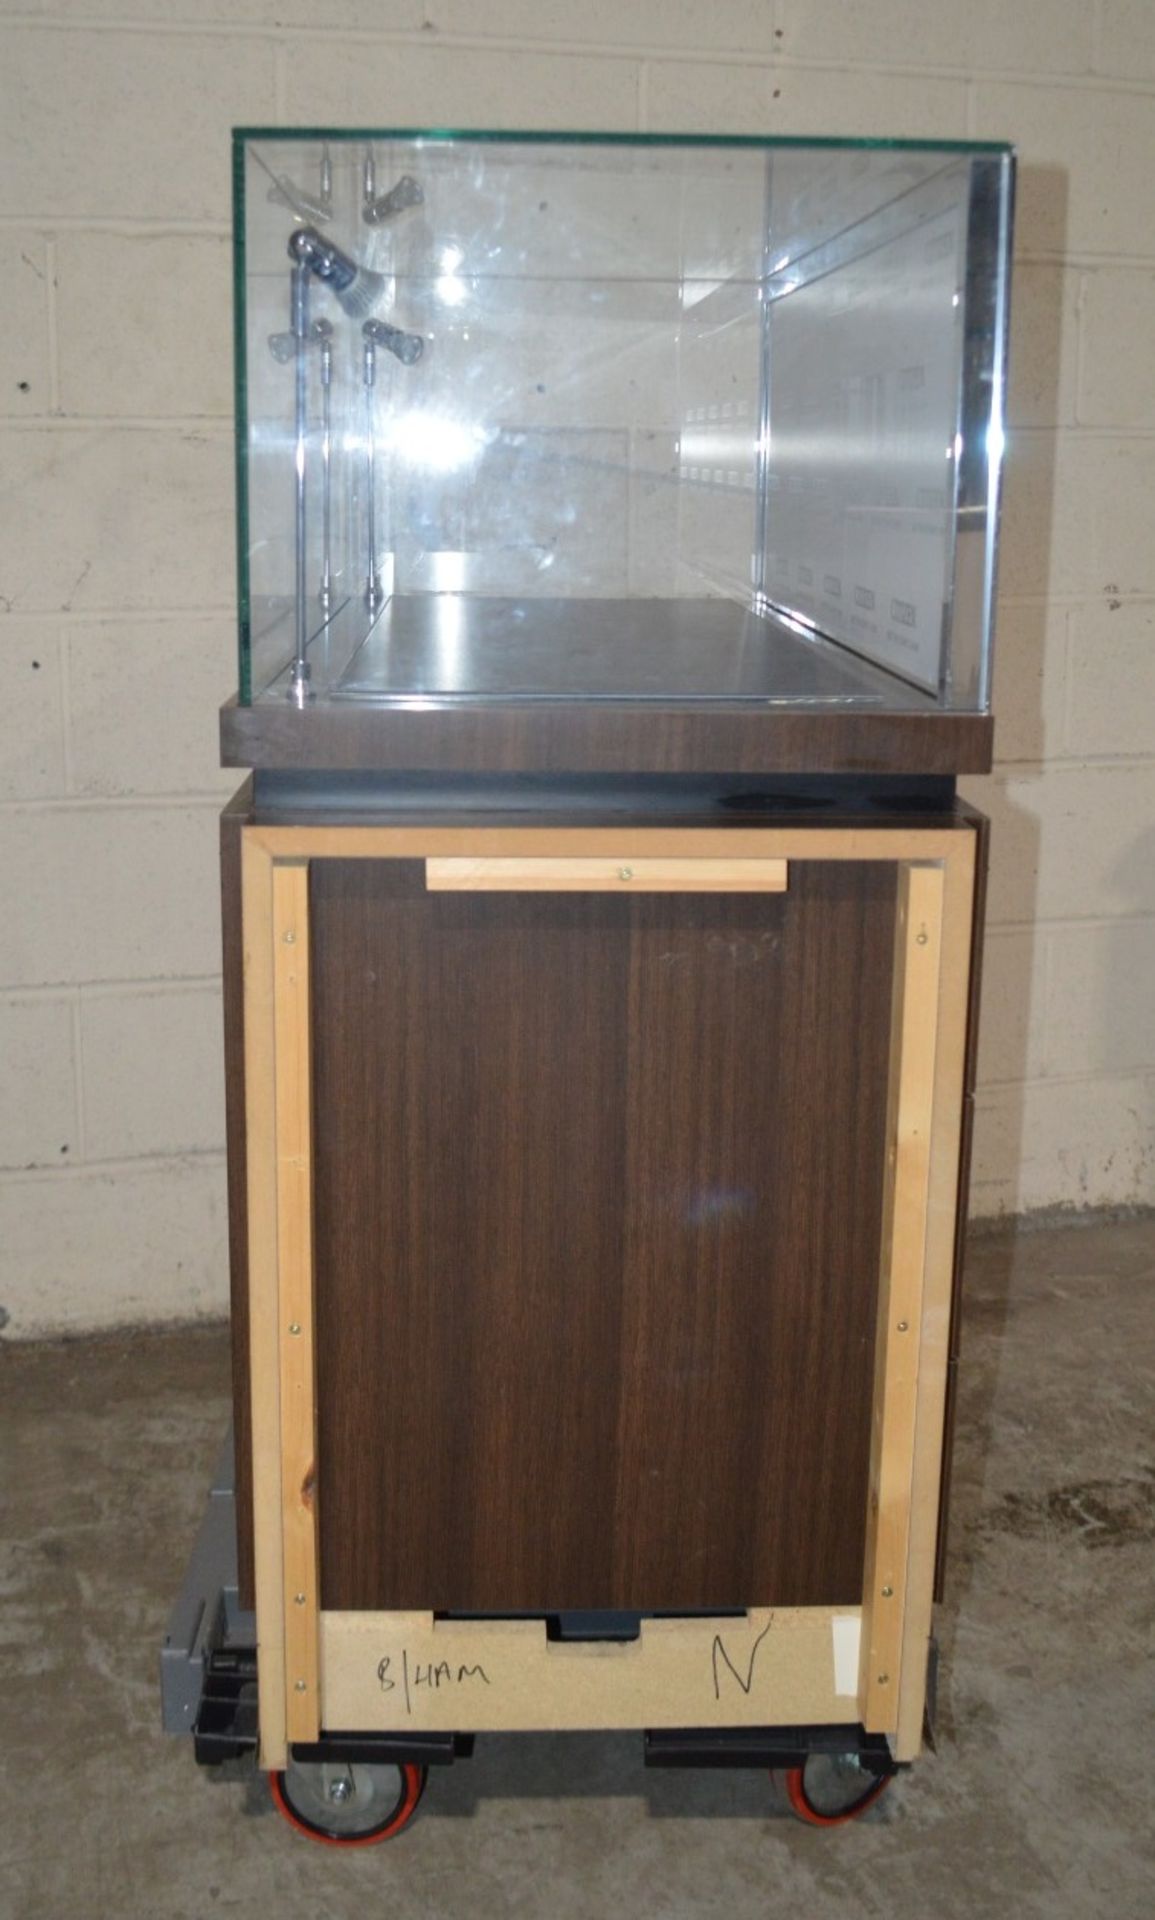 1 x Lockable Illuminated Display Case With 3 x Unlocked Drawers - Supplied With Keys - Dimensions: - Image 5 of 8